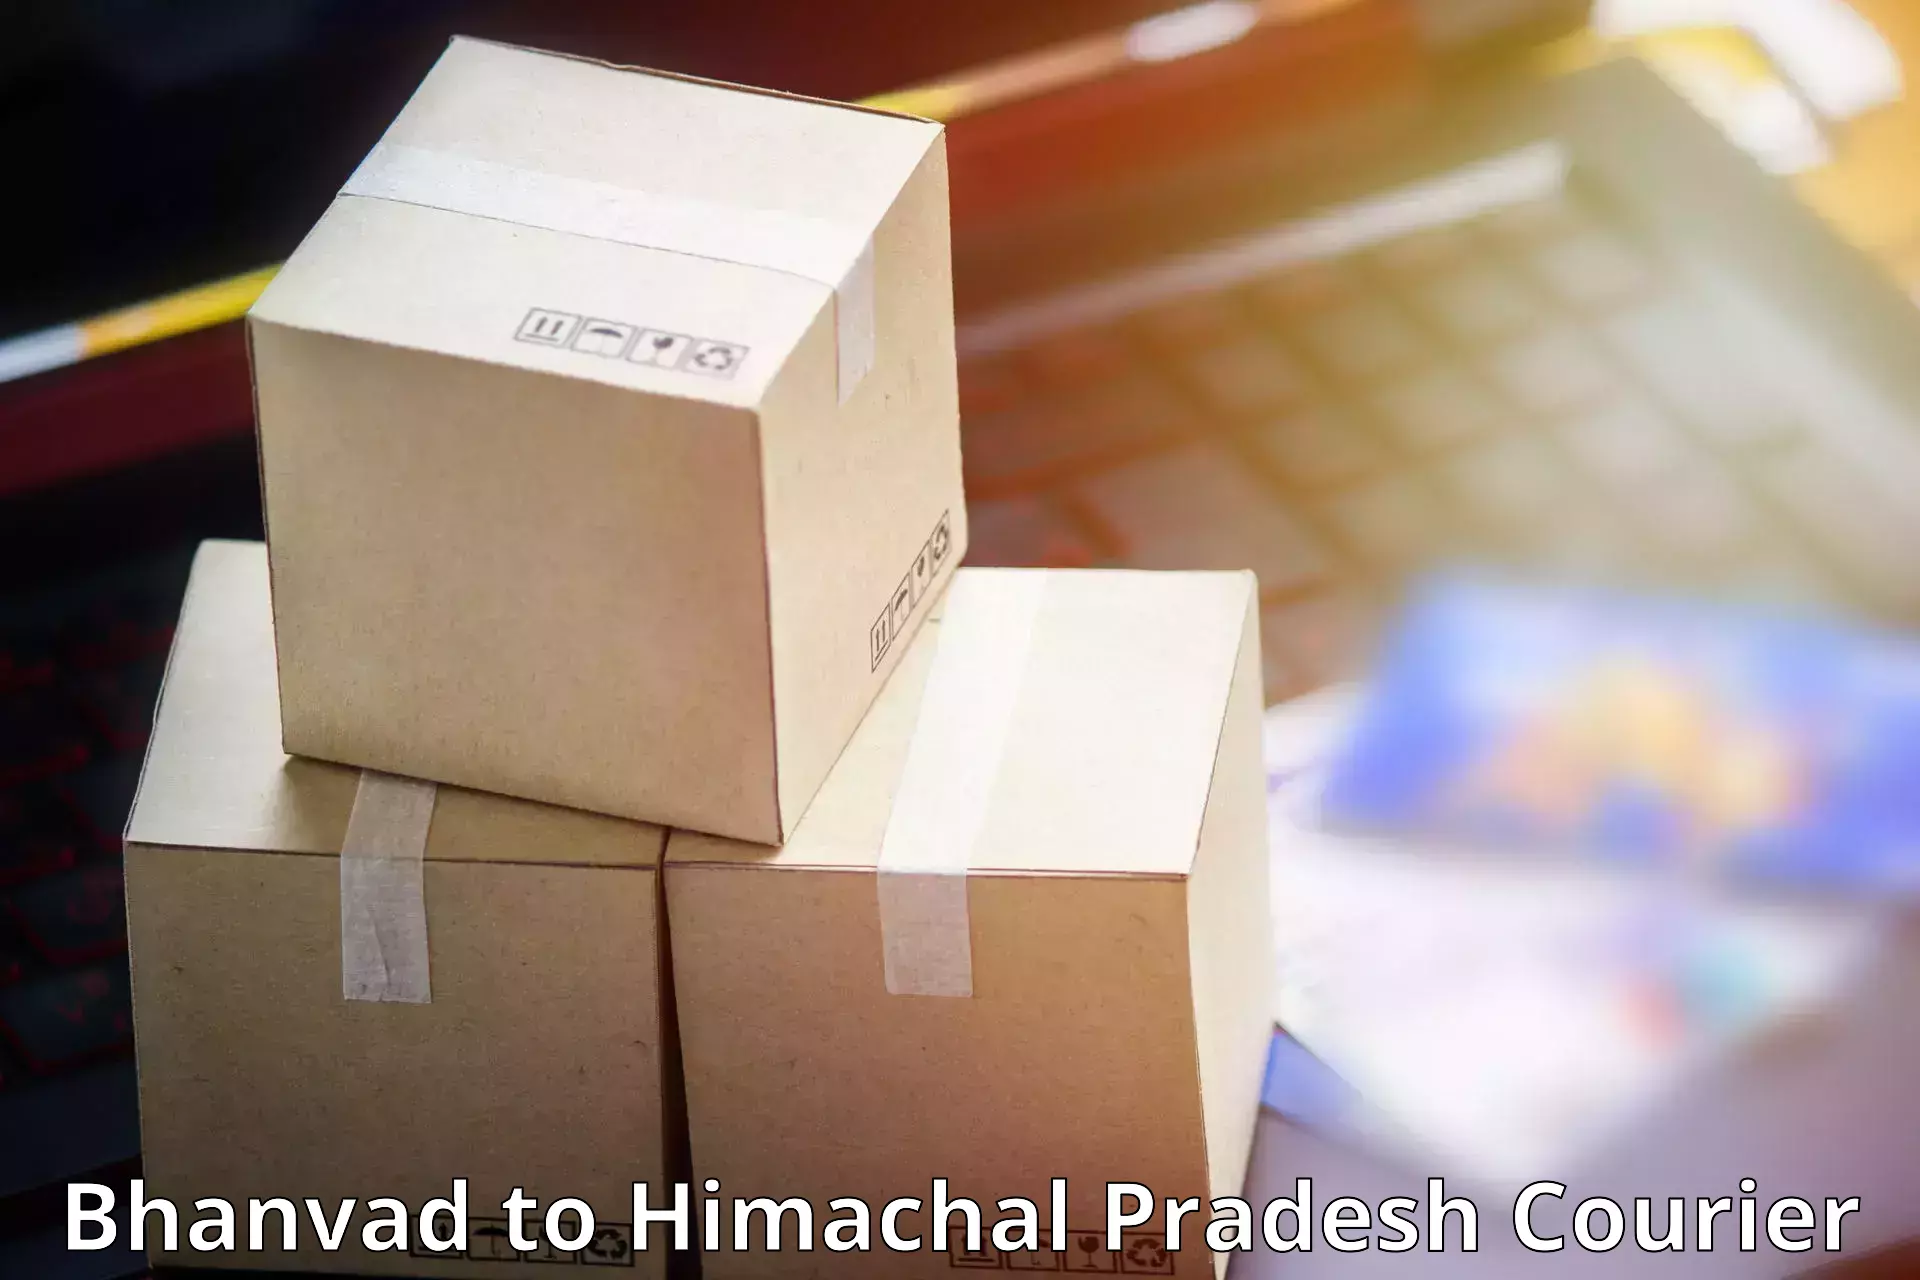 Flexible parcel services Bhanvad to Anni Kullu